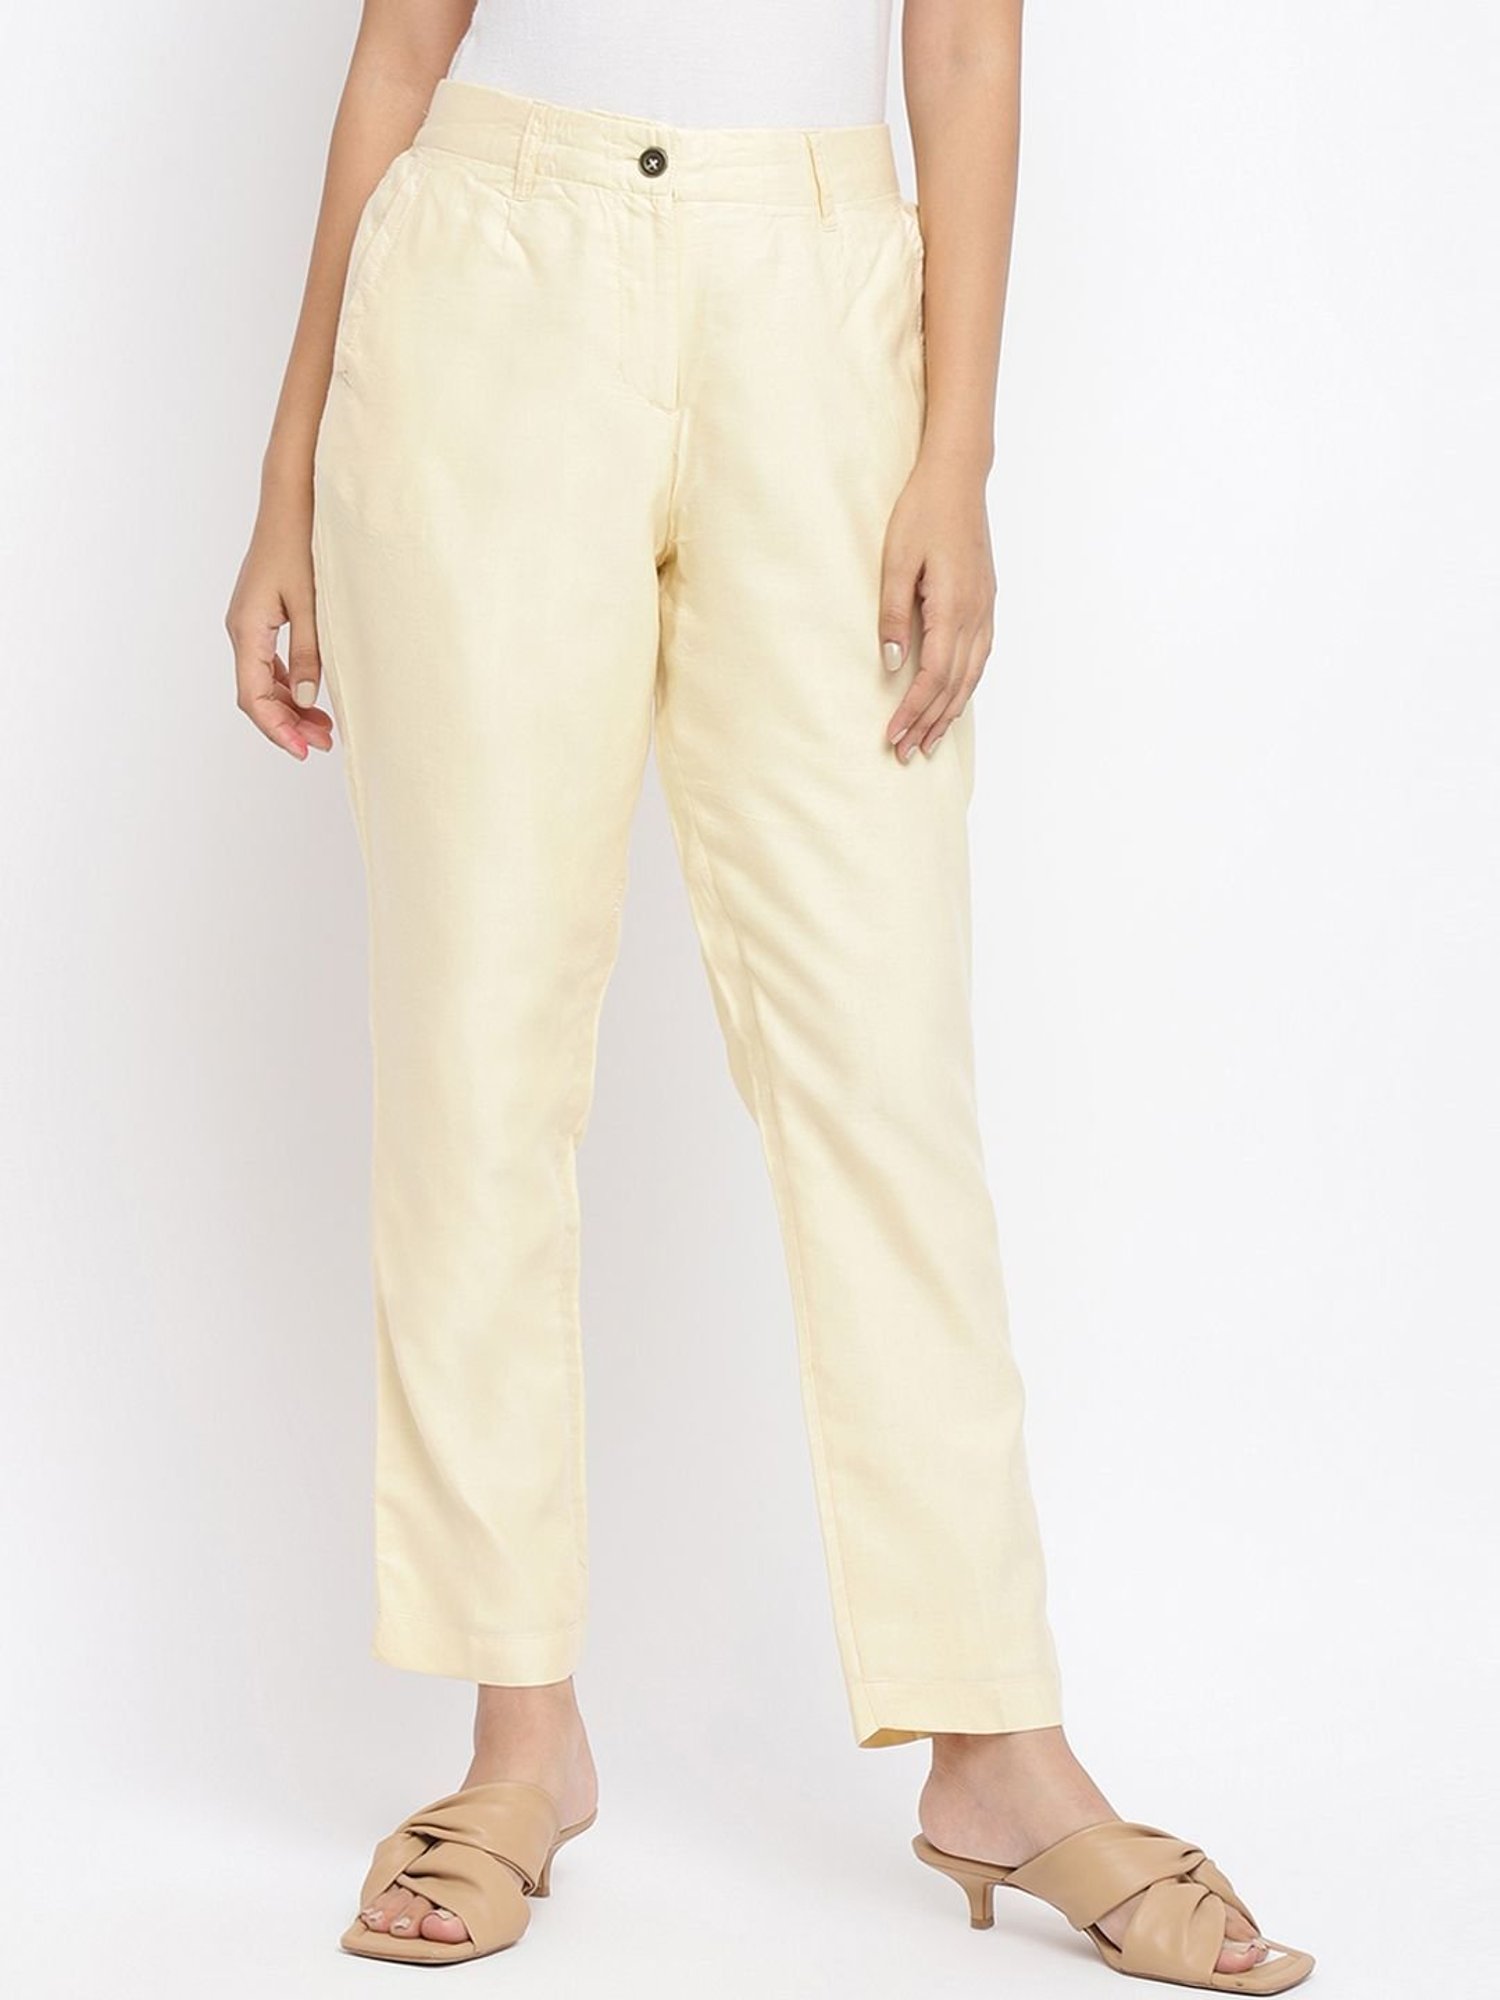 Buy RIVI Cotton Regular Fit Women Trousers & Pants Beige color Online at  Low Prices in India - Paytmmall.com